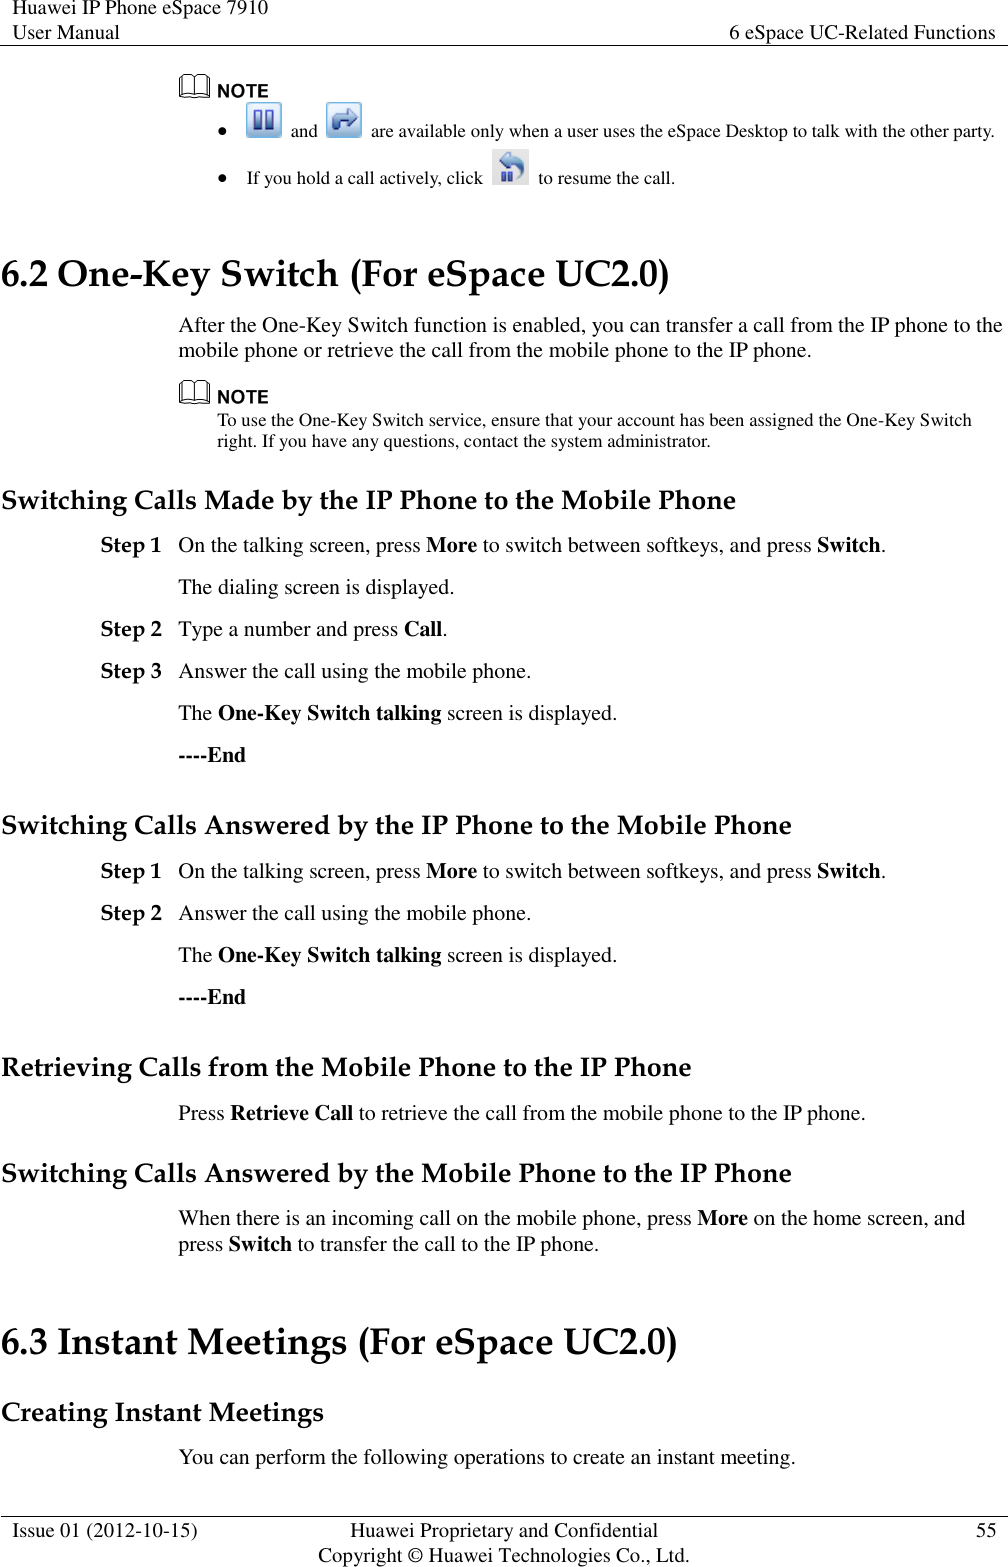 Huawei IP Phone eSpace 7910 User Manual 6 eSpace UC-Related Functions  Issue 01 (2012-10-15) Huawei Proprietary and Confidential                                     Copyright © Huawei Technologies Co., Ltd. 55      and    are available only when a user uses the eSpace Desktop to talk with the other party.  If you hold a call actively, click    to resume the call. 6.2 One-Key Switch (For eSpace UC2.0) After the One-Key Switch function is enabled, you can transfer a call from the IP phone to the mobile phone or retrieve the call from the mobile phone to the IP phone.  To use the One-Key Switch service, ensure that your account has been assigned the One-Key Switch right. If you have any questions, contact the system administrator. Switching Calls Made by the IP Phone to the Mobile Phone Step 1 On the talking screen, press More to switch between softkeys, and press Switch. The dialing screen is displayed. Step 2 Type a number and press Call. Step 3 Answer the call using the mobile phone. The One-Key Switch talking screen is displayed. ----End Switching Calls Answered by the IP Phone to the Mobile Phone Step 1 On the talking screen, press More to switch between softkeys, and press Switch. Step 2 Answer the call using the mobile phone. The One-Key Switch talking screen is displayed. ----End Retrieving Calls from the Mobile Phone to the IP Phone Press Retrieve Call to retrieve the call from the mobile phone to the IP phone. Switching Calls Answered by the Mobile Phone to the IP Phone When there is an incoming call on the mobile phone, press More on the home screen, and press Switch to transfer the call to the IP phone. 6.3 Instant Meetings (For eSpace UC2.0) Creating Instant Meetings You can perform the following operations to create an instant meeting. 